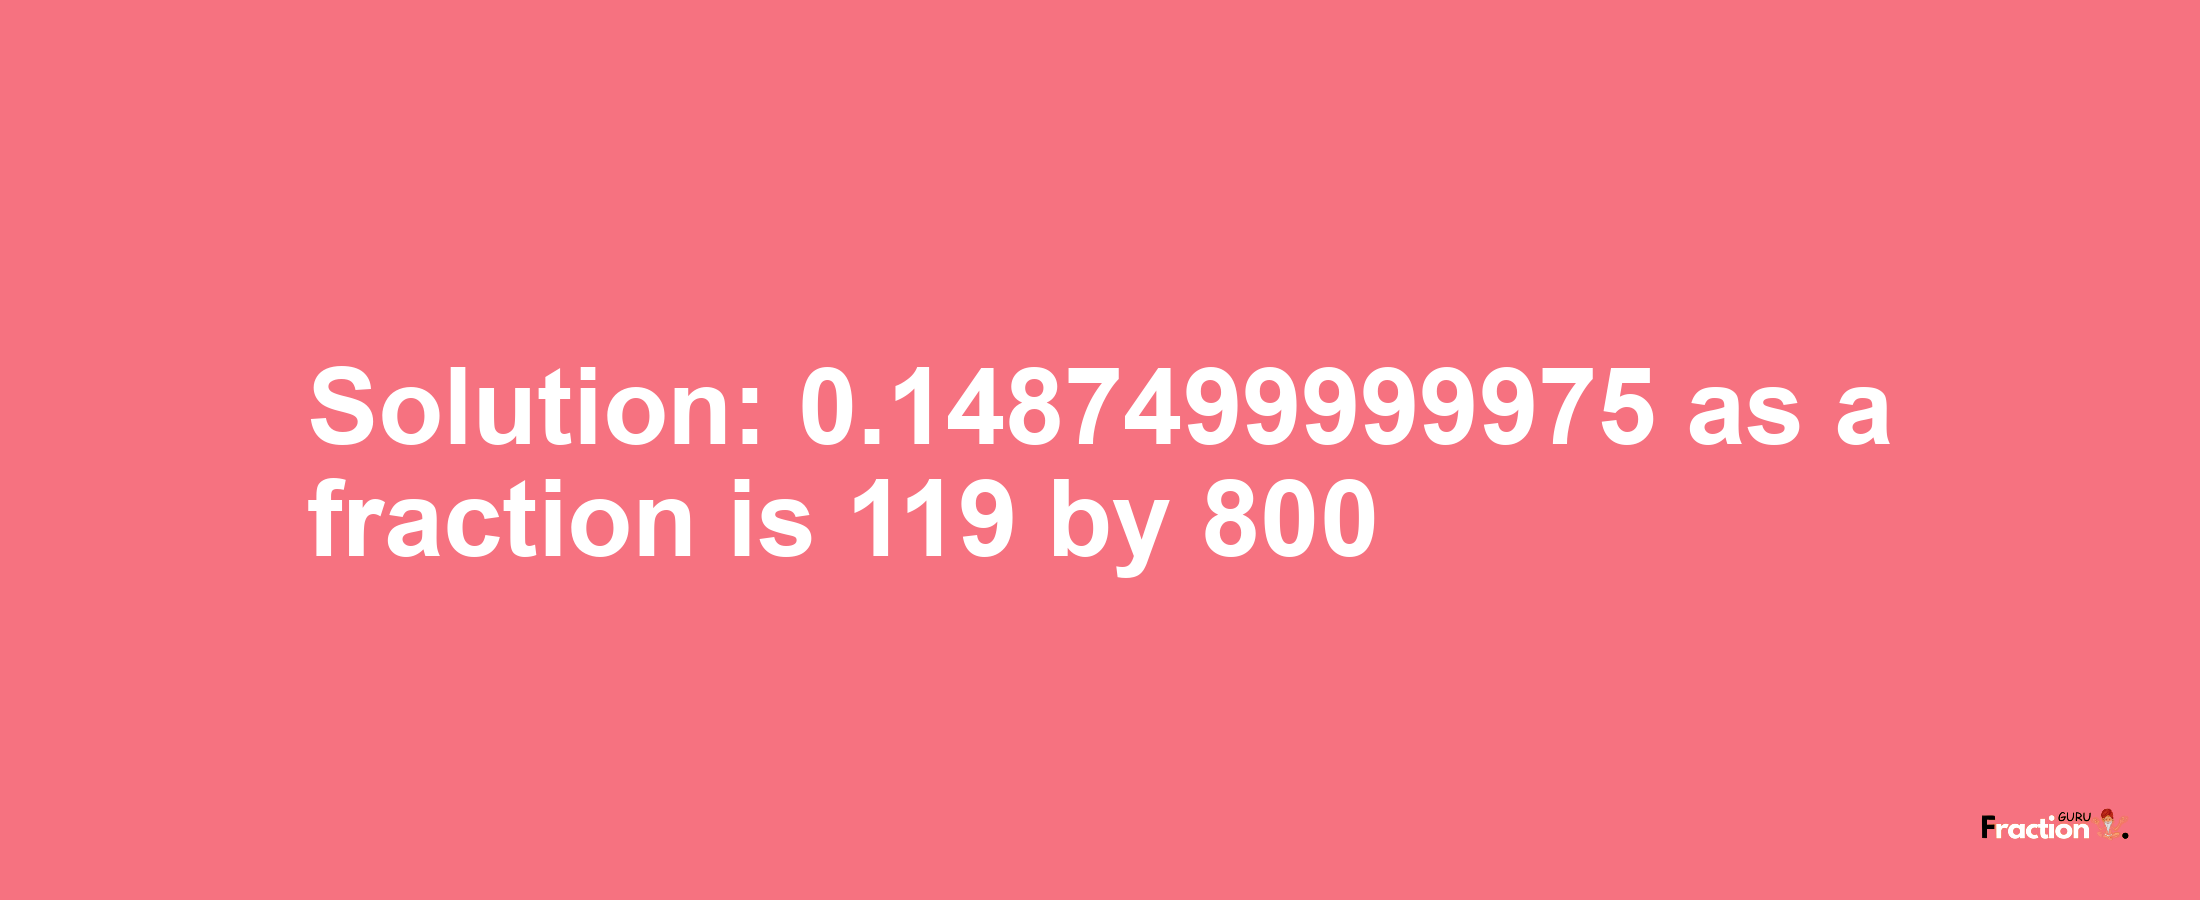 Solution:0.1487499999975 as a fraction is 119/800